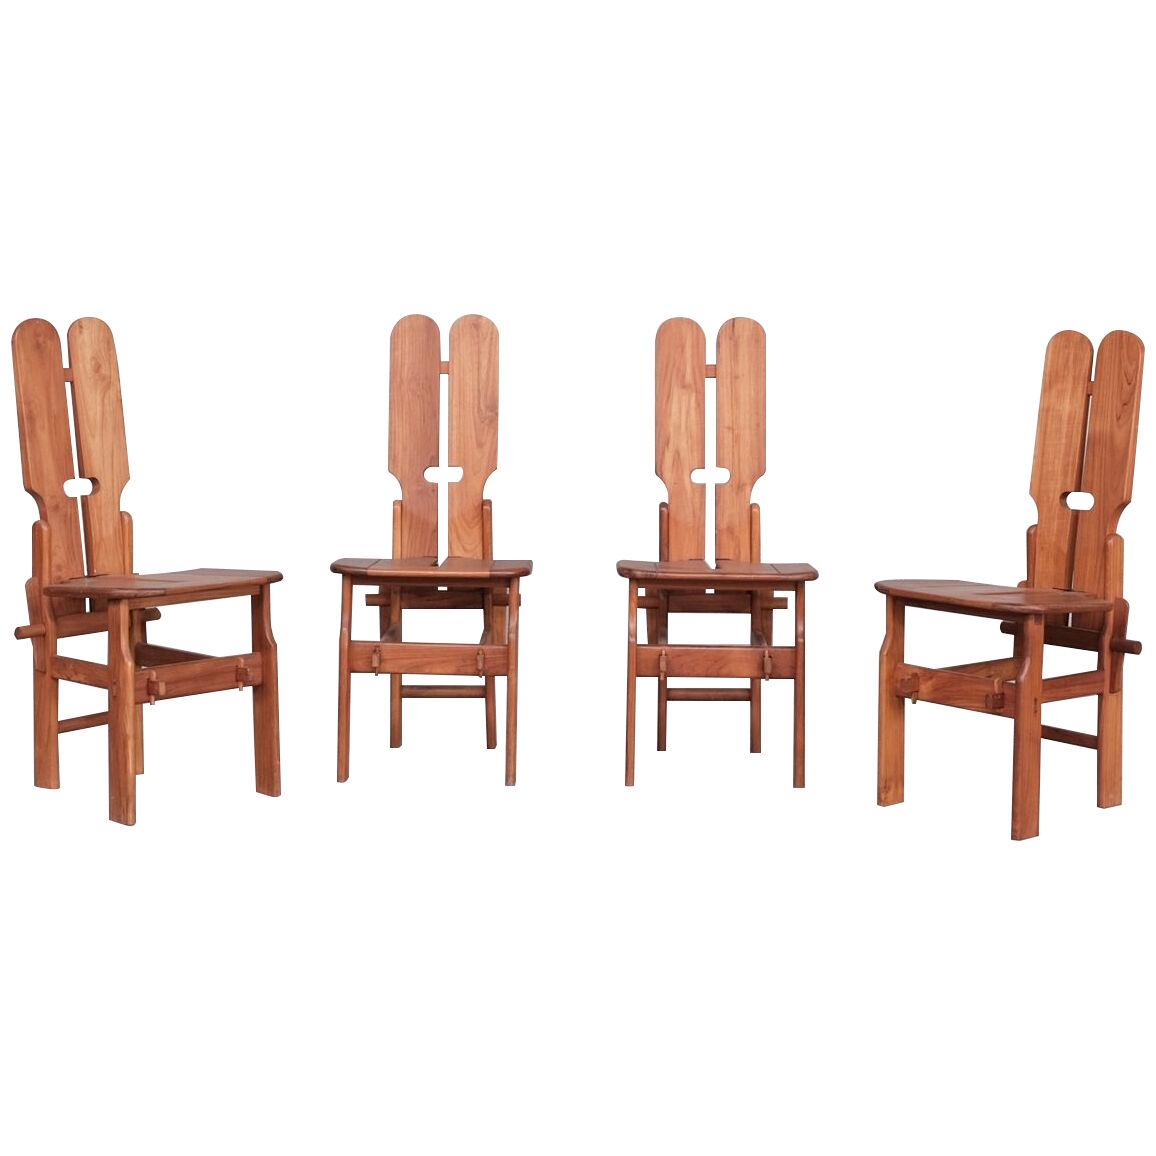 Italian Mid-Century Architectural Dining Chairs (4)